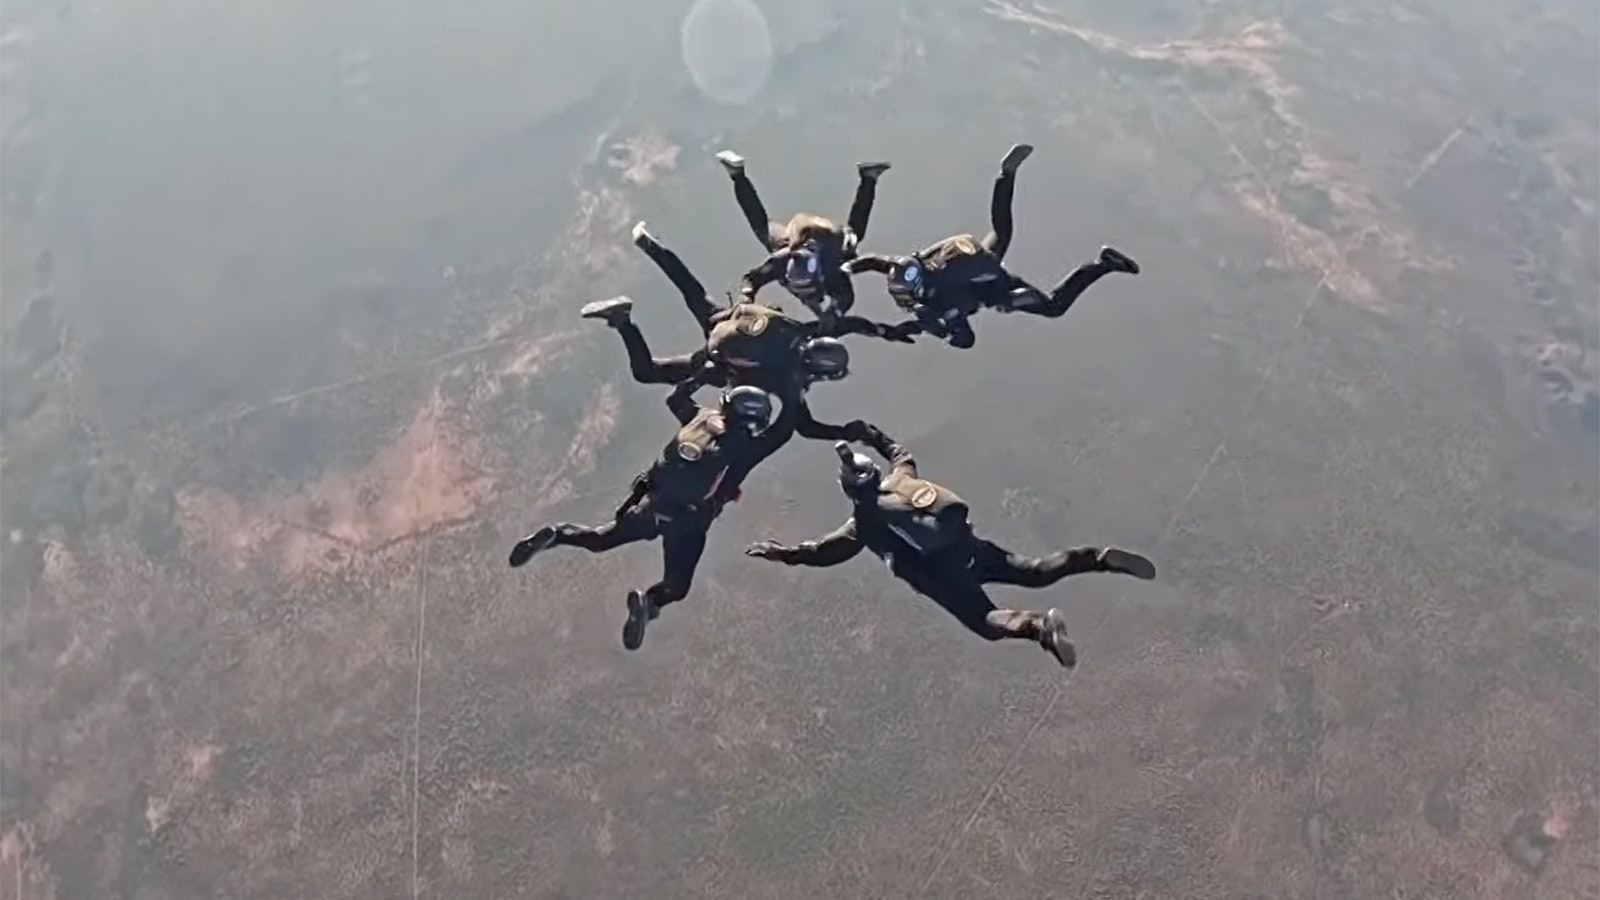 Part of the world record was skydiving in formation.